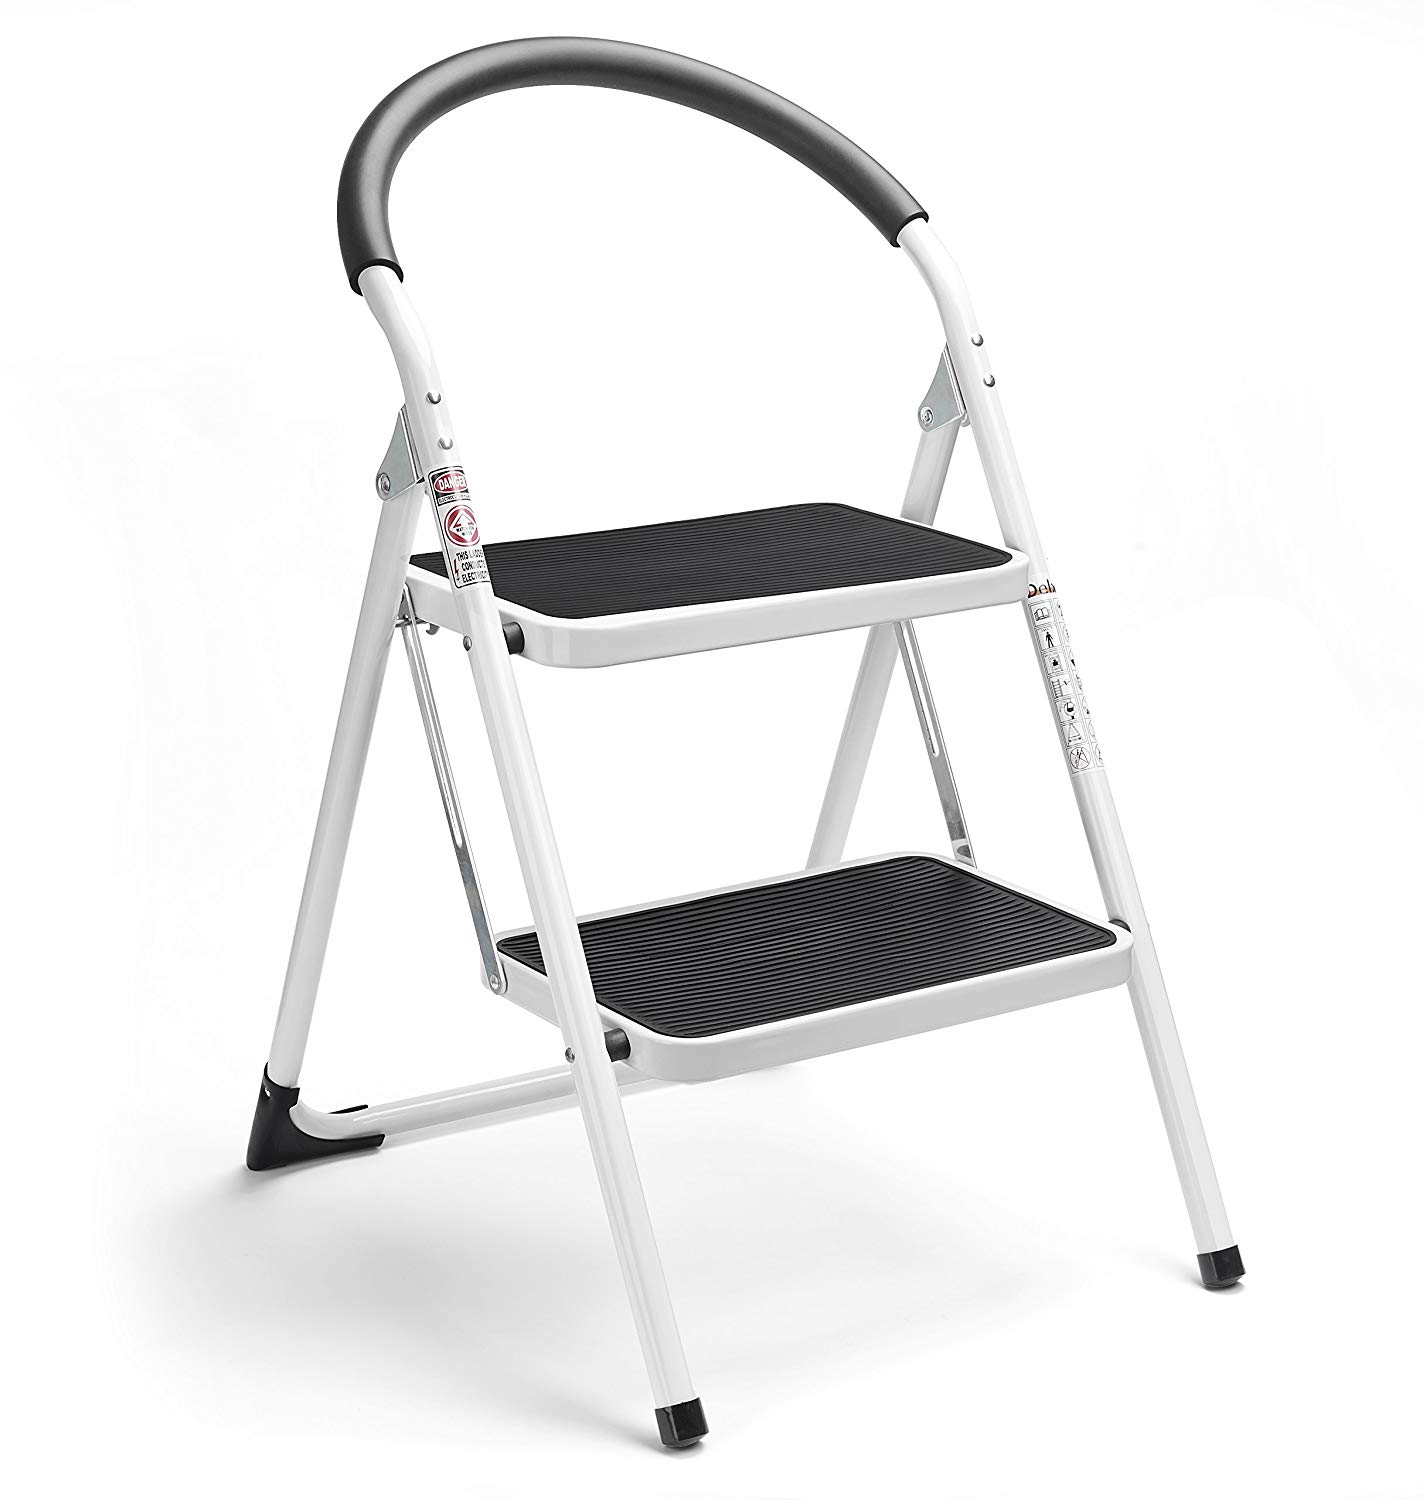 Delxo 2 Step Ladder Folding Step Stool Steel Stepladders with Handgrip Anti-slip Sturdy and Wide Pedal Steel Ladder 330lbs White and Black Combo 2-Feet (WK2061A-2)